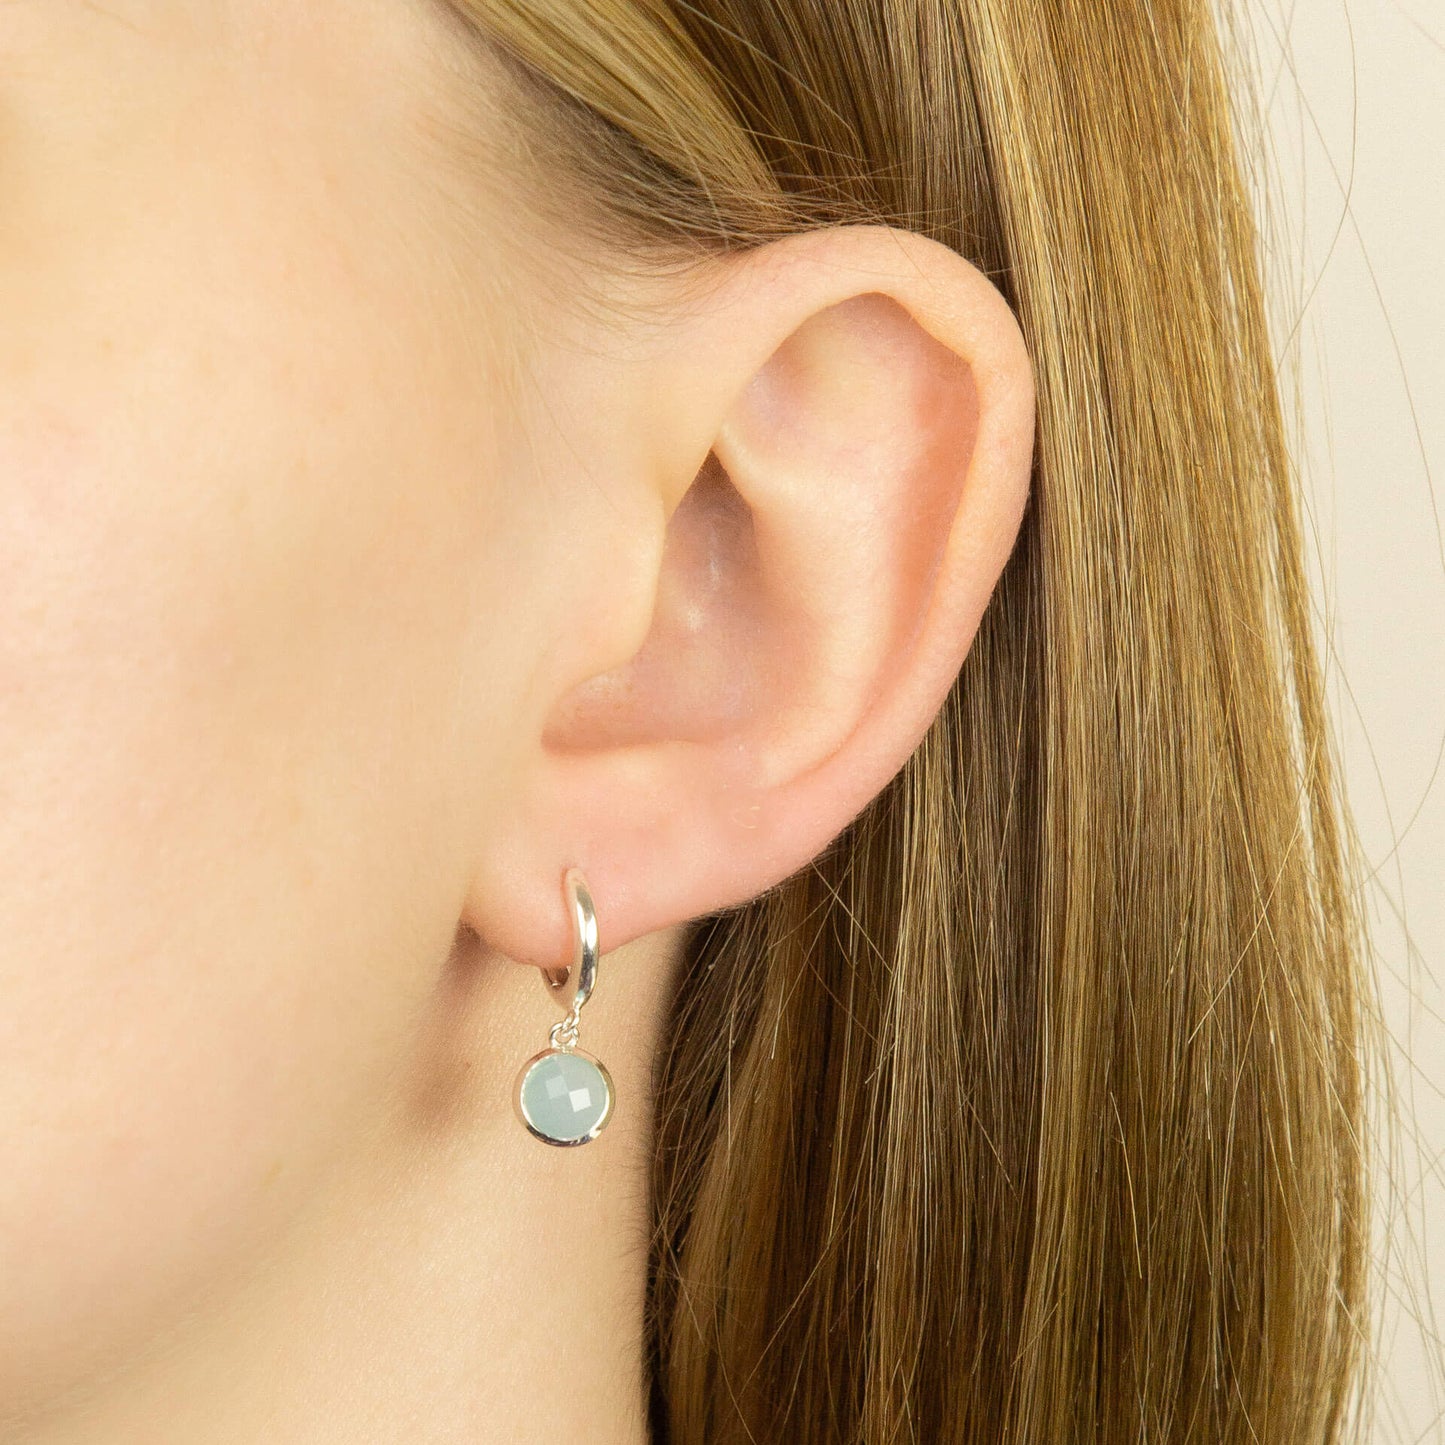 Recycled Silver Hoop Earrings With Round Blue Chalcedony Charm